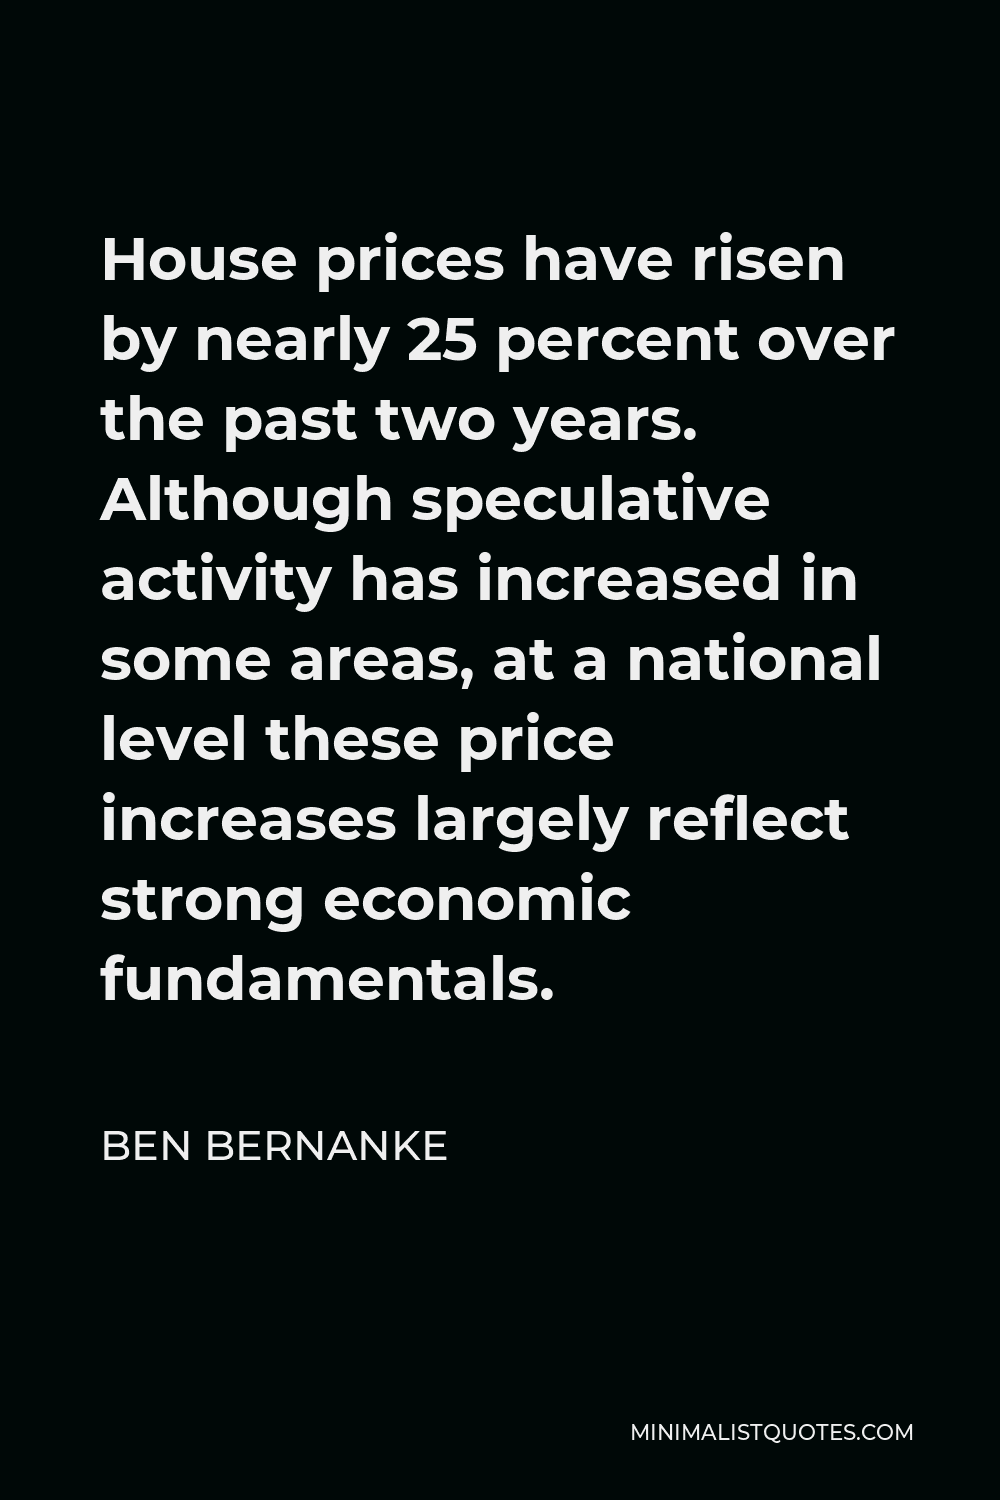 Ben Bernanke Quote - House prices have risen by nearly 25 percent over the past two years. Although speculative activity has increased in some areas, at a national level these price increases largely reflect strong economic fundamentals.